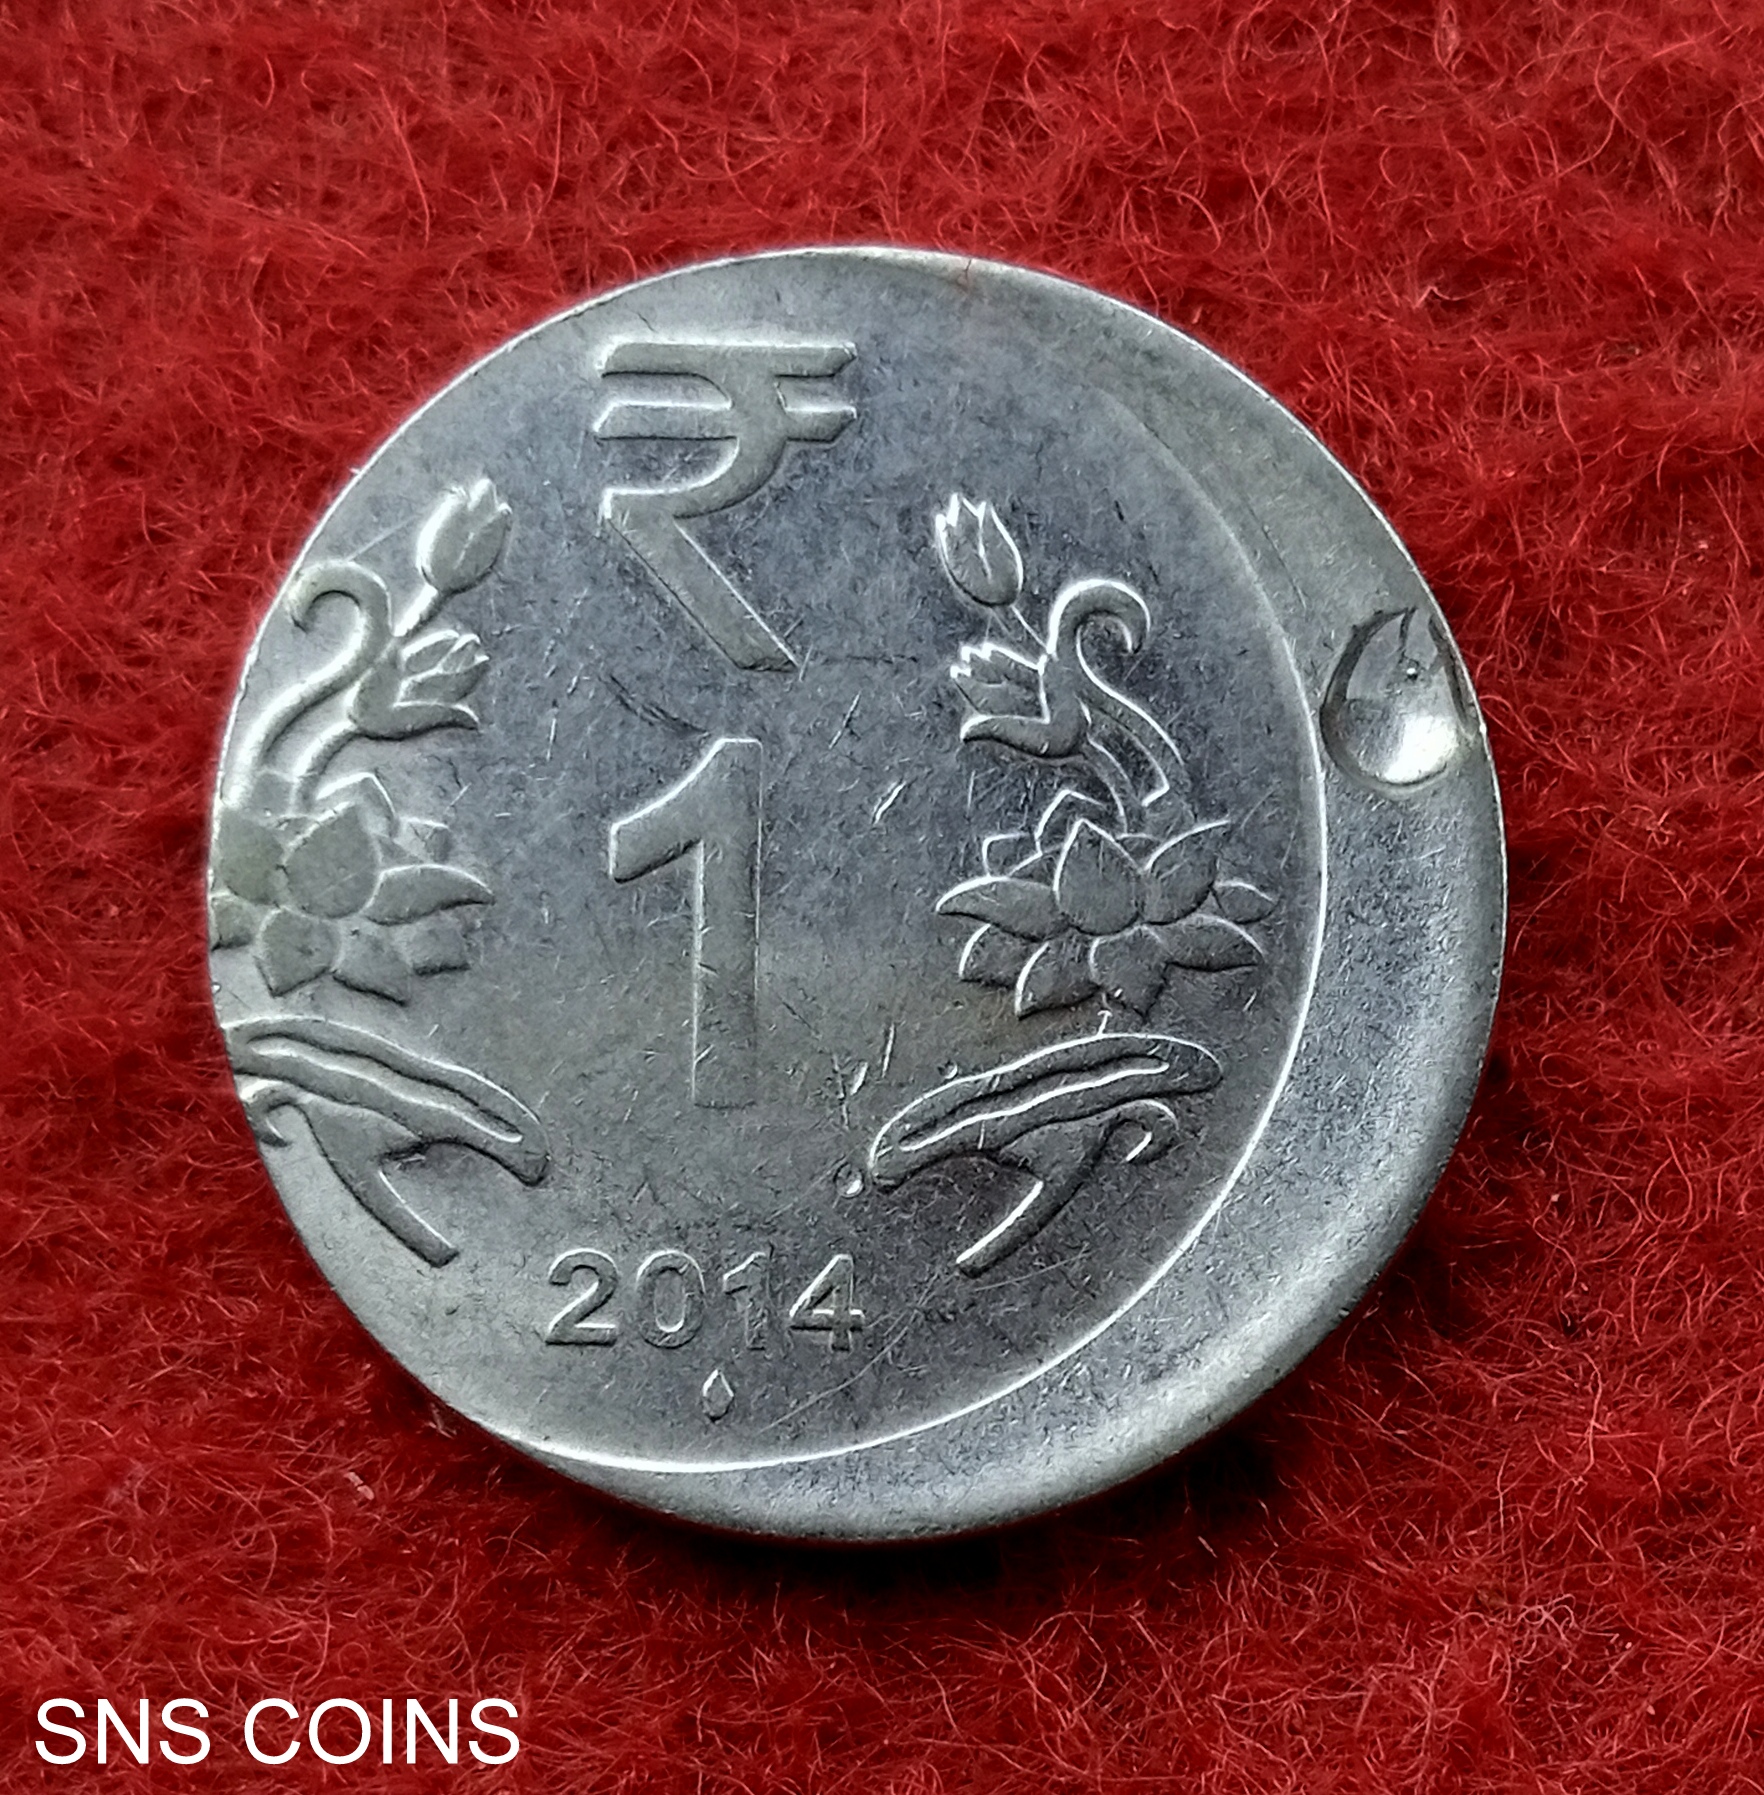 INDIA 1 RUPEES 2014 COIN UNC 